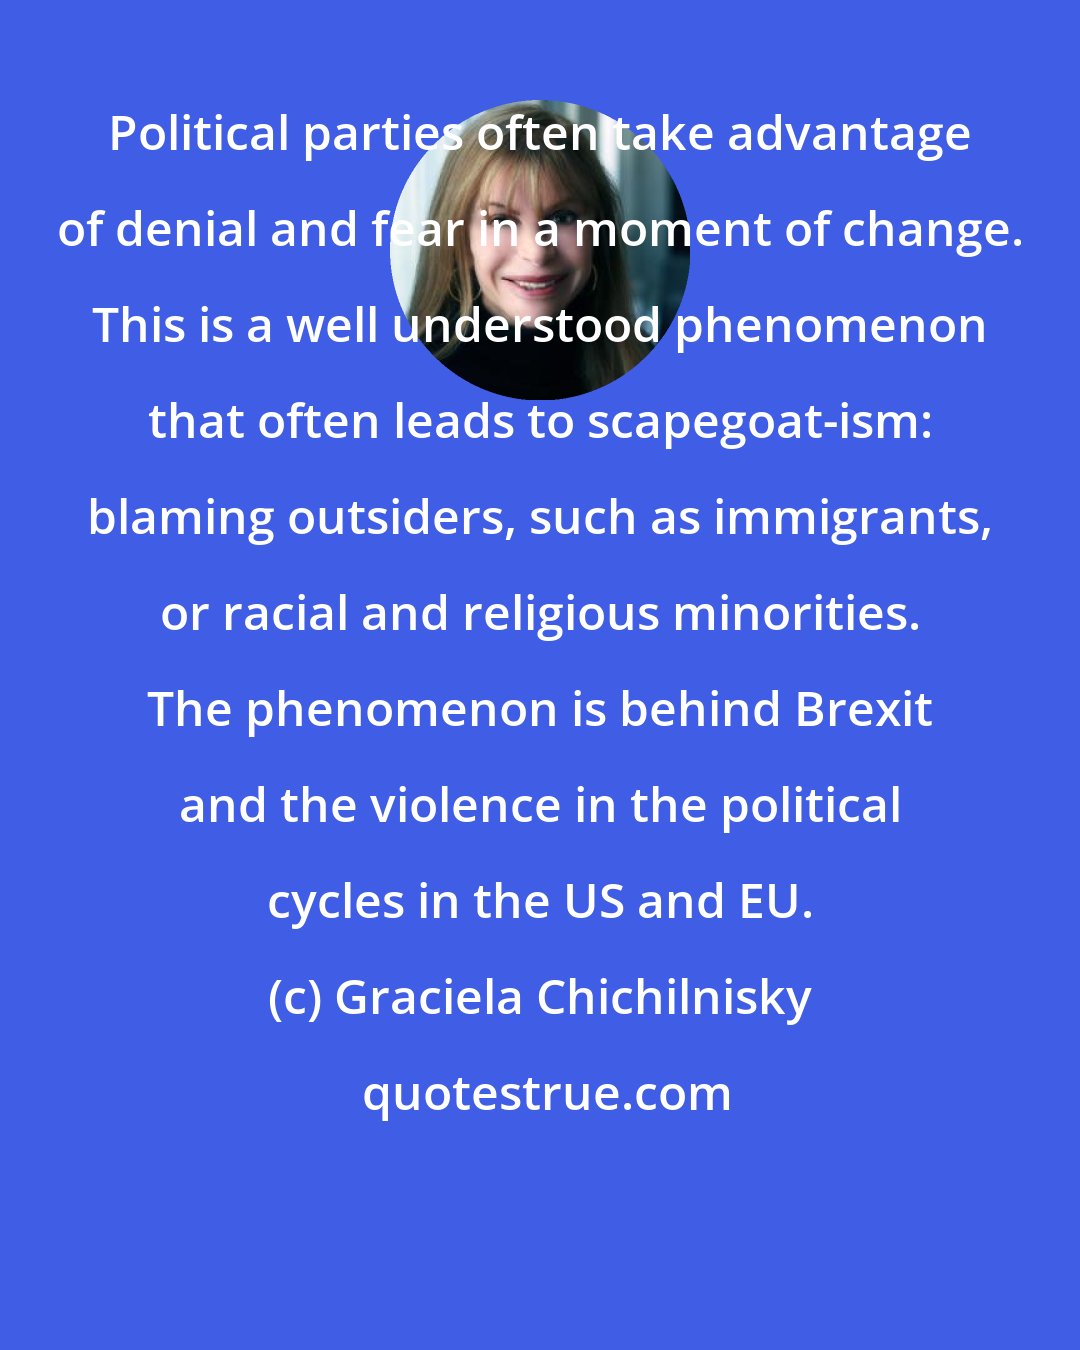 Graciela Chichilnisky: Political parties often take advantage of denial and fear in a moment of change. This is a well understood phenomenon that often leads to scapegoat-ism: blaming outsiders, such as immigrants, or racial and religious minorities. The phenomenon is behind Brexit and the violence in the political cycles in the US and EU.